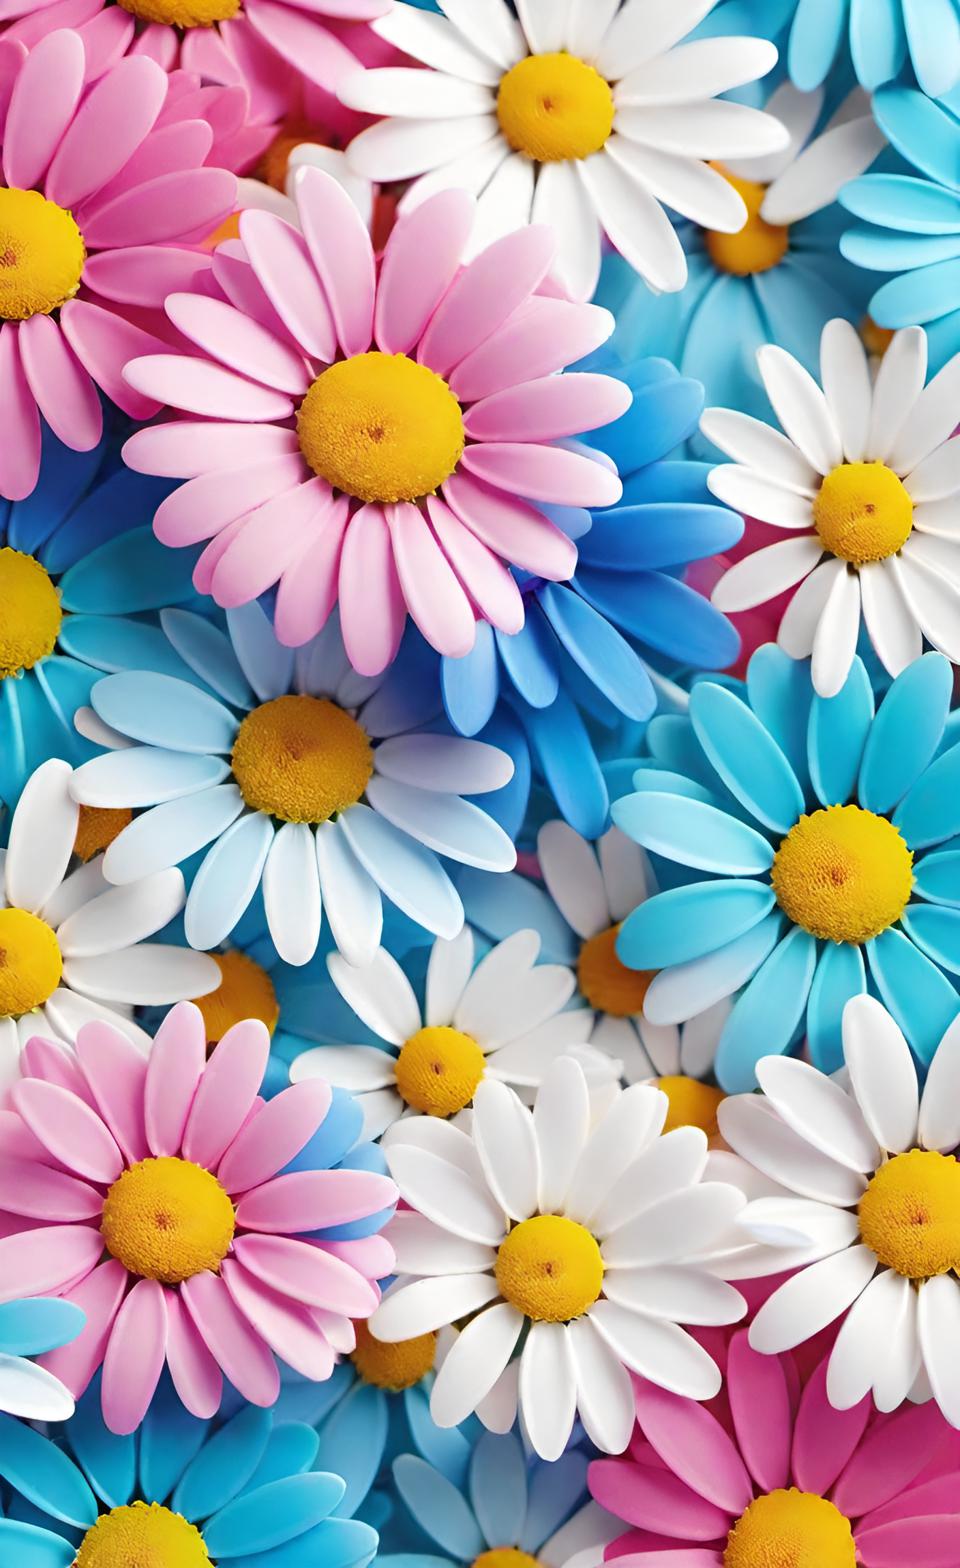 Small Daisies Pink Blue White Colorful Cute Background Wallpaper 4K For Free Download